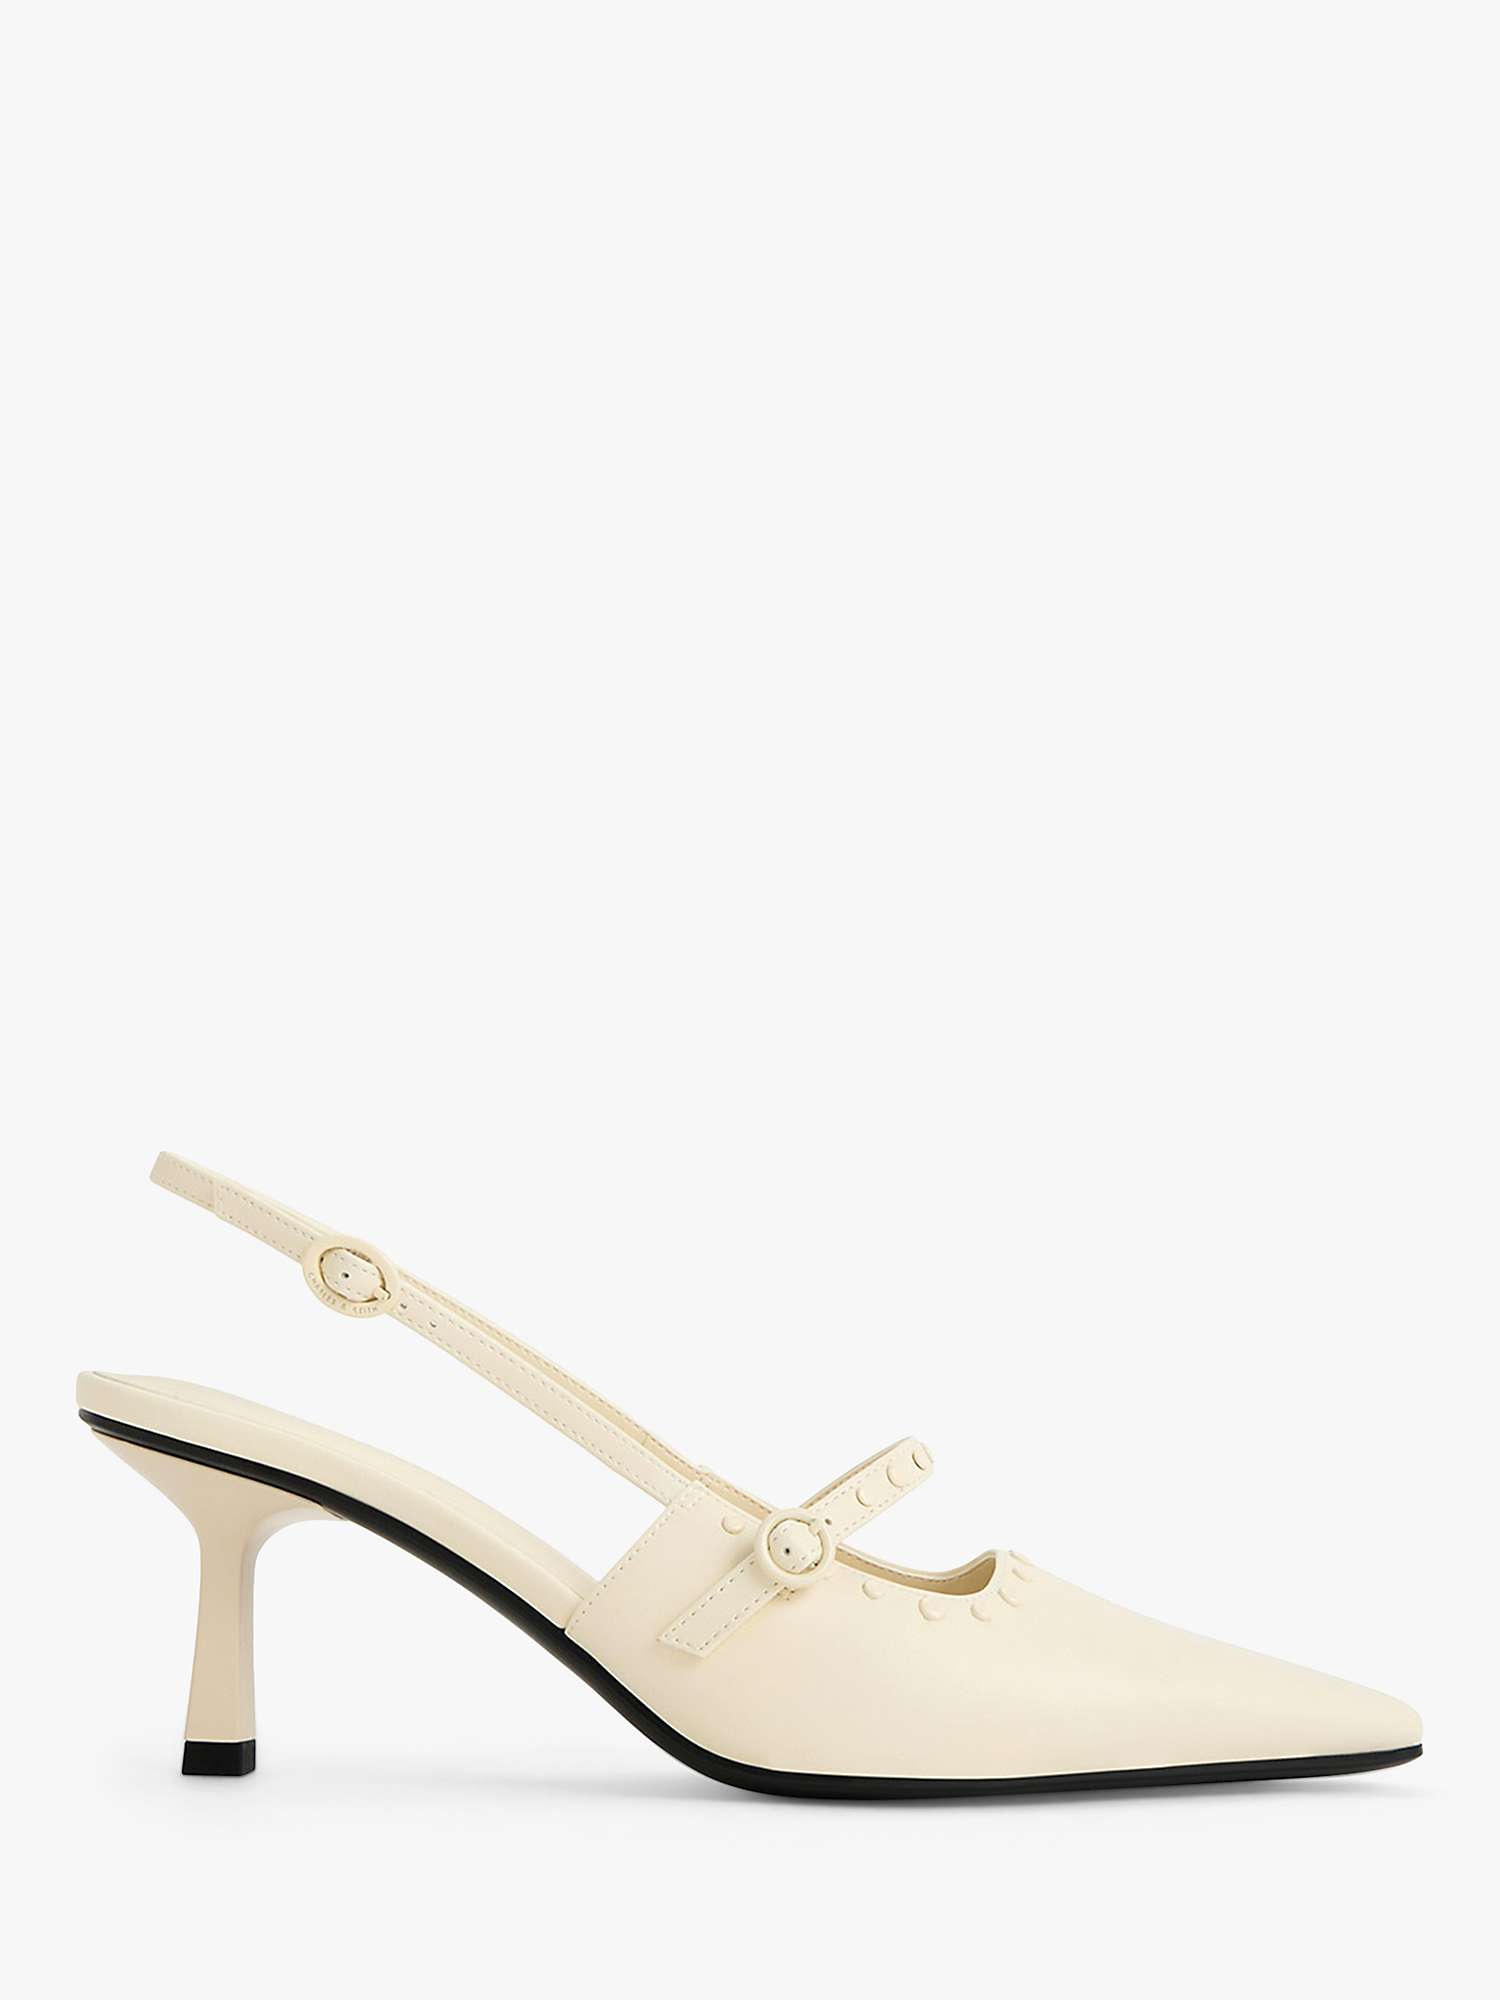 Buy CHARLES & KEITH Studded Slingback Court Shoes, Chalk Online at johnlewis.com